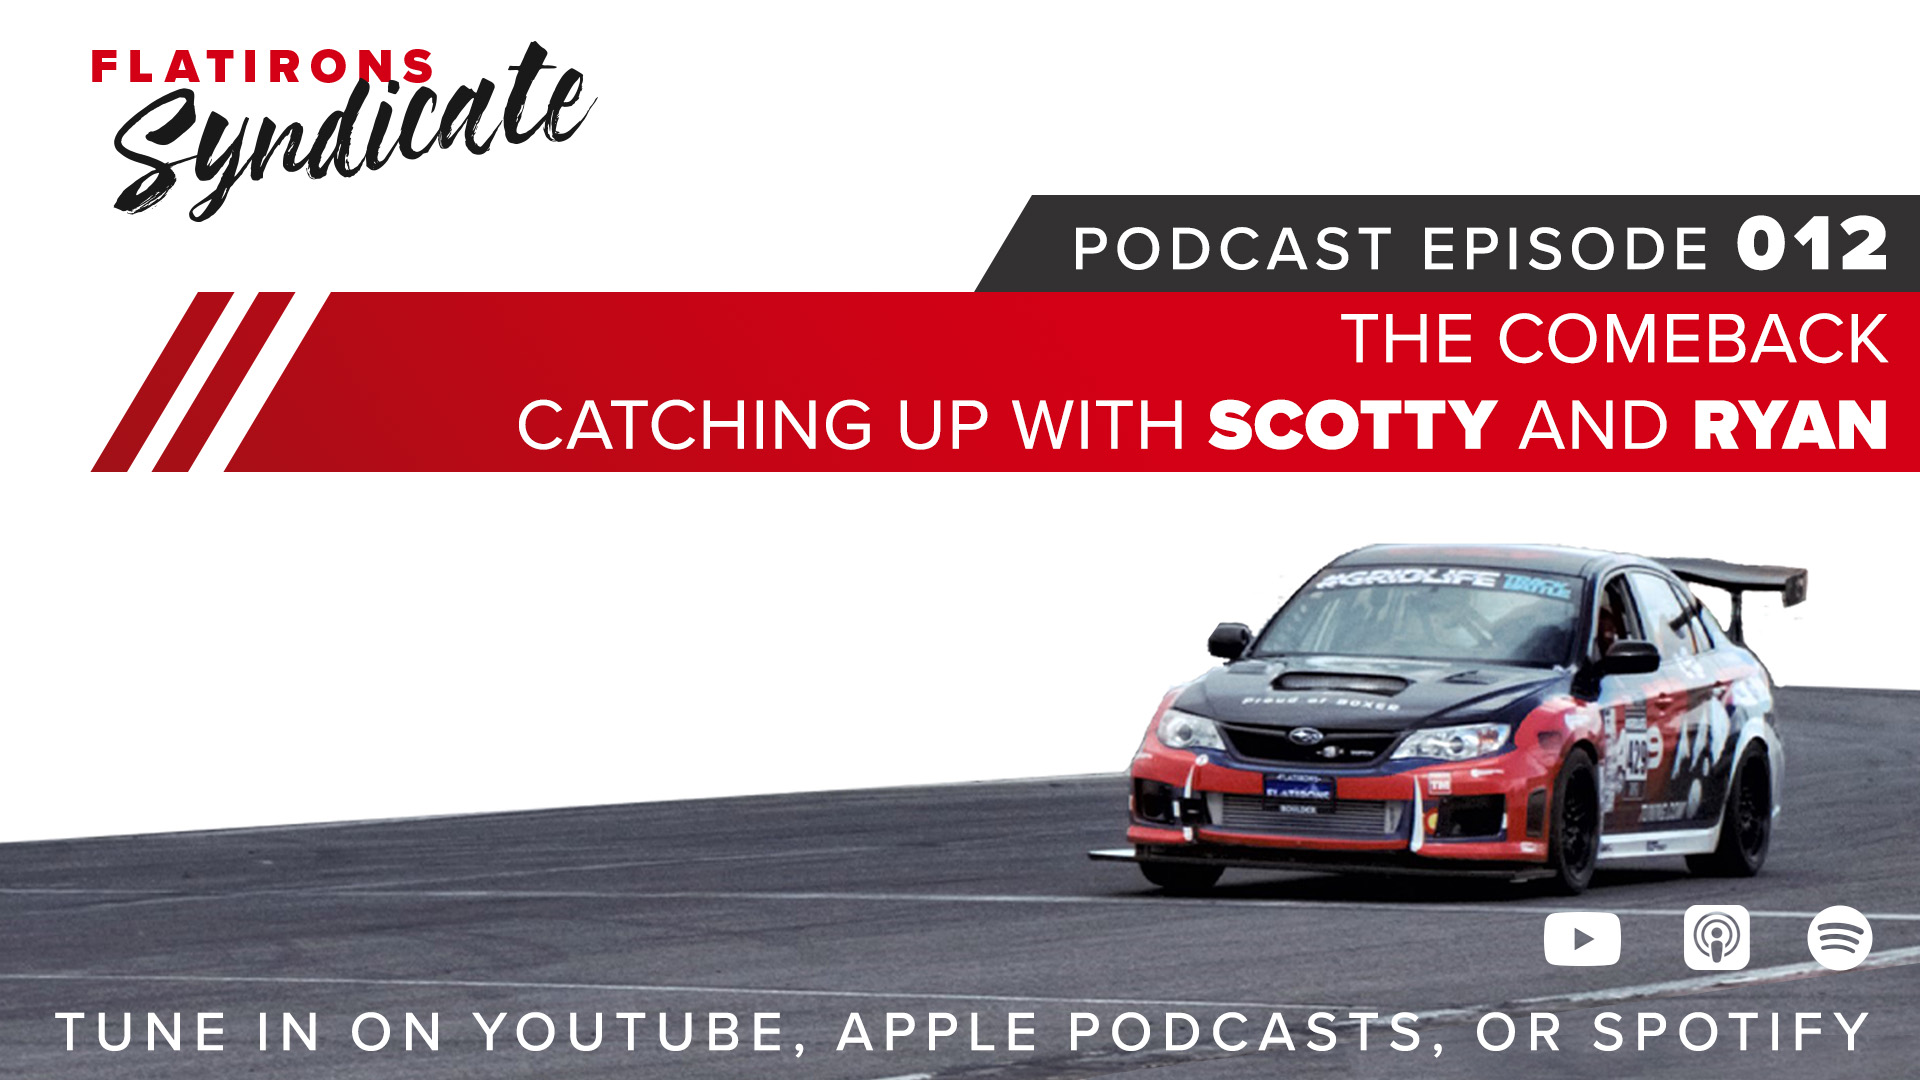 The Syndicate Podcast is back after a long break! -  Catching up with Scotty and Ryan